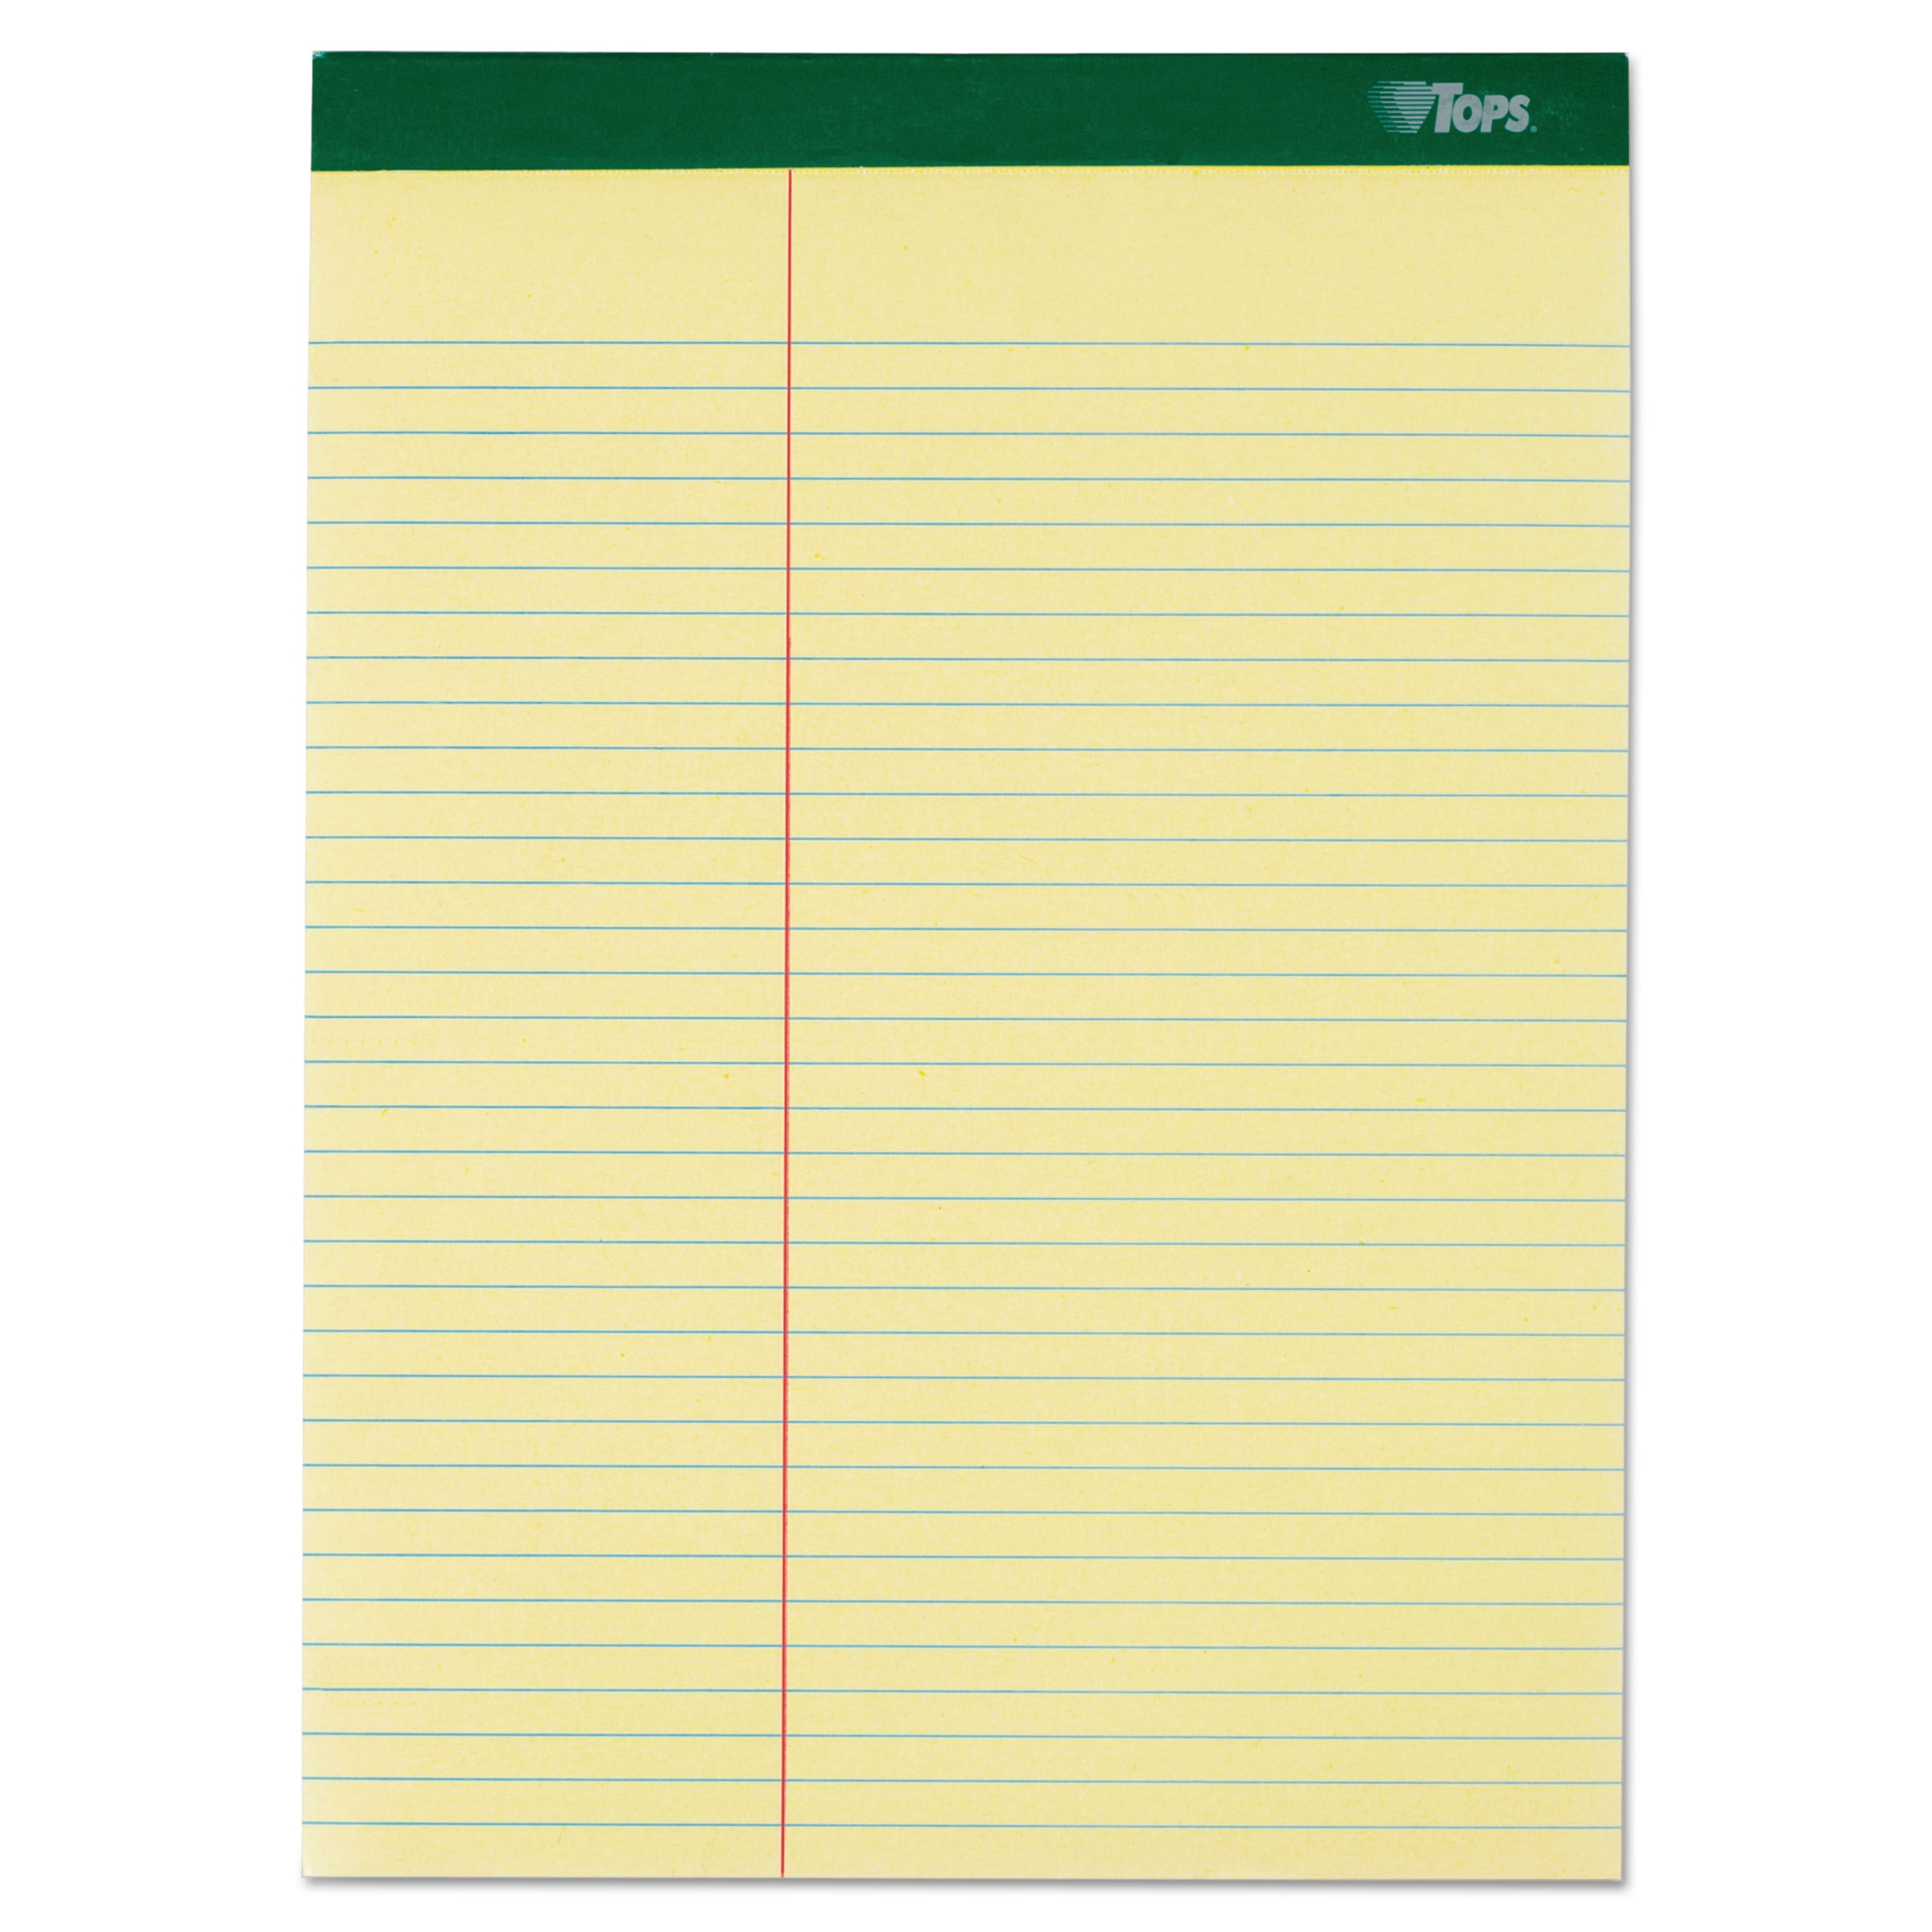 Great for Use as Home Office Supplies Memo Pads or Steno Pads Note Pads Wide Ruled Letter Writing Canary Paper 8-1/2 x 11-3/4 50 Sheets 3 Pack,canary yellow Legal Pad Writing Pads 